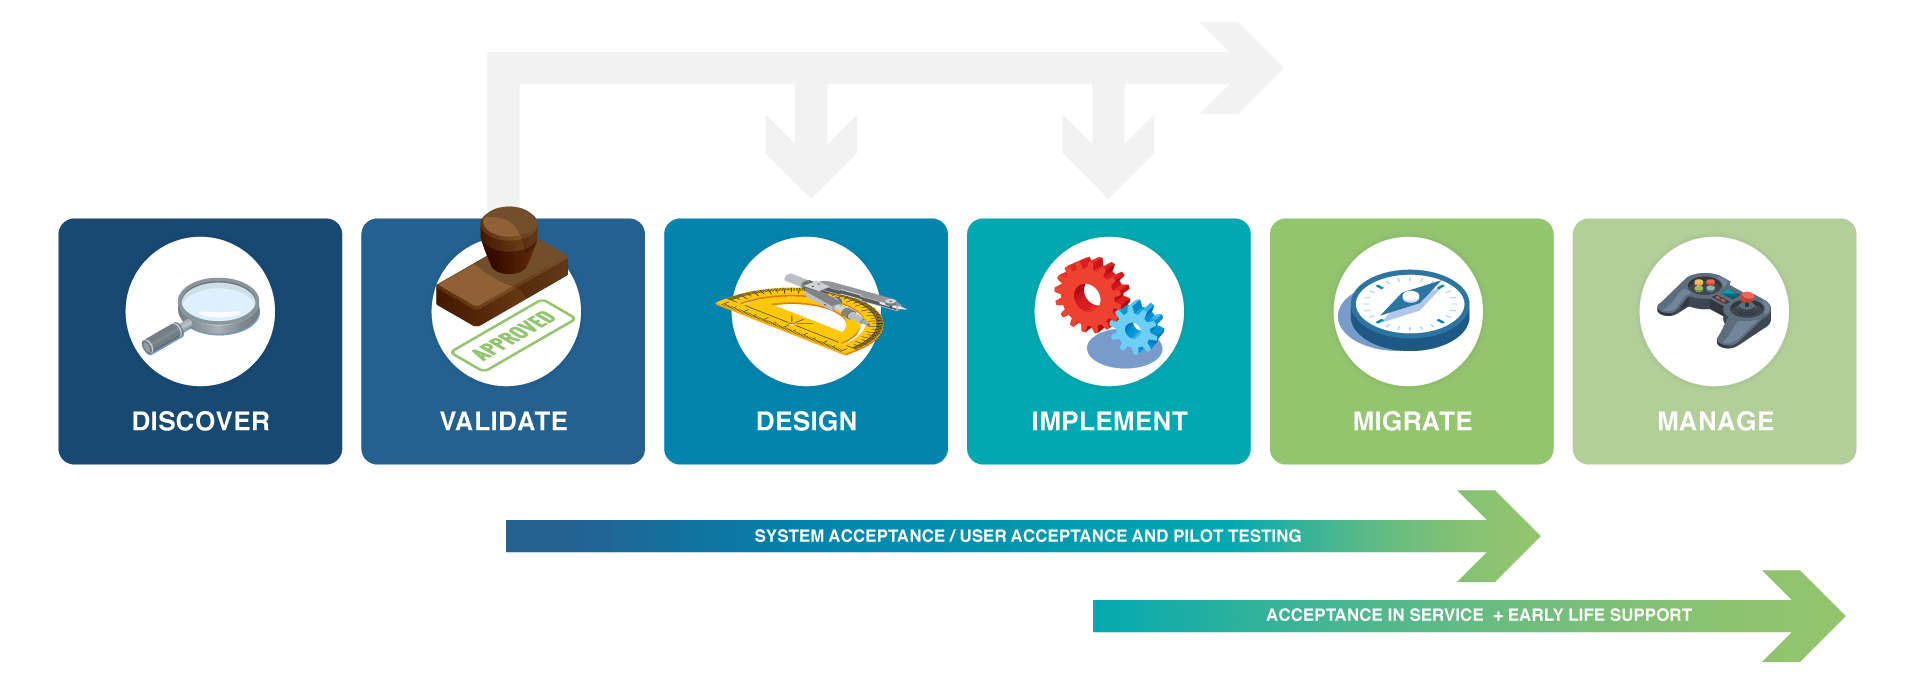 Professional Services Lifecycle Engagement  